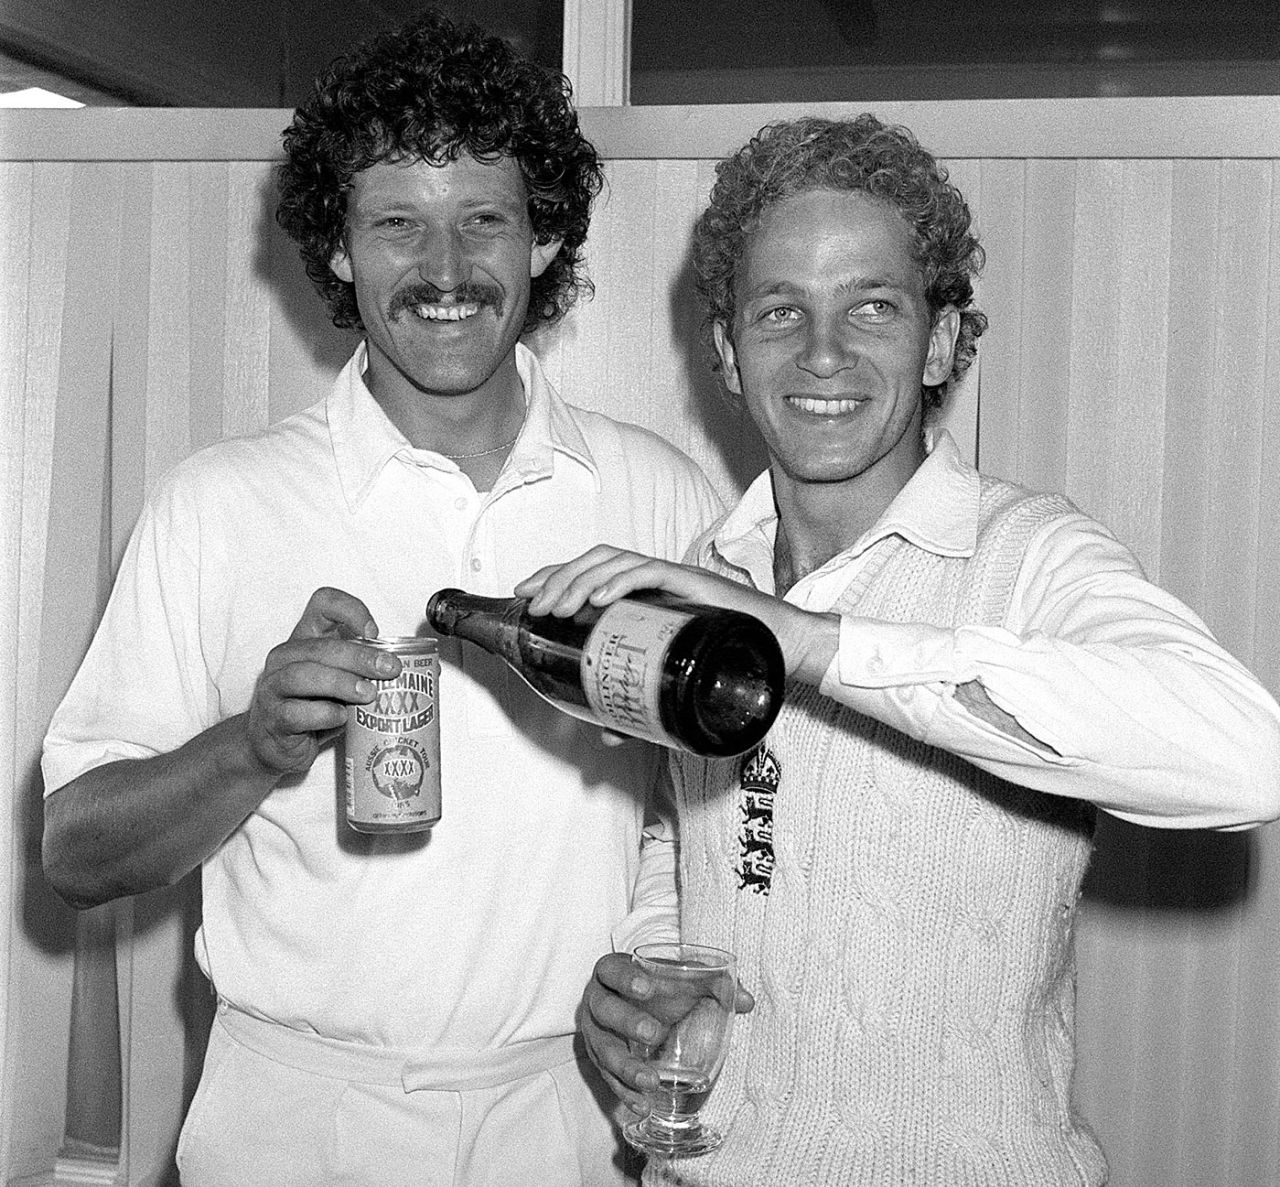 Richard Ellison and David Gower celebrate after winning the 1985 Ashes, England v Australia, 5th Test, The Oval, 5th day, August 20, 1985 